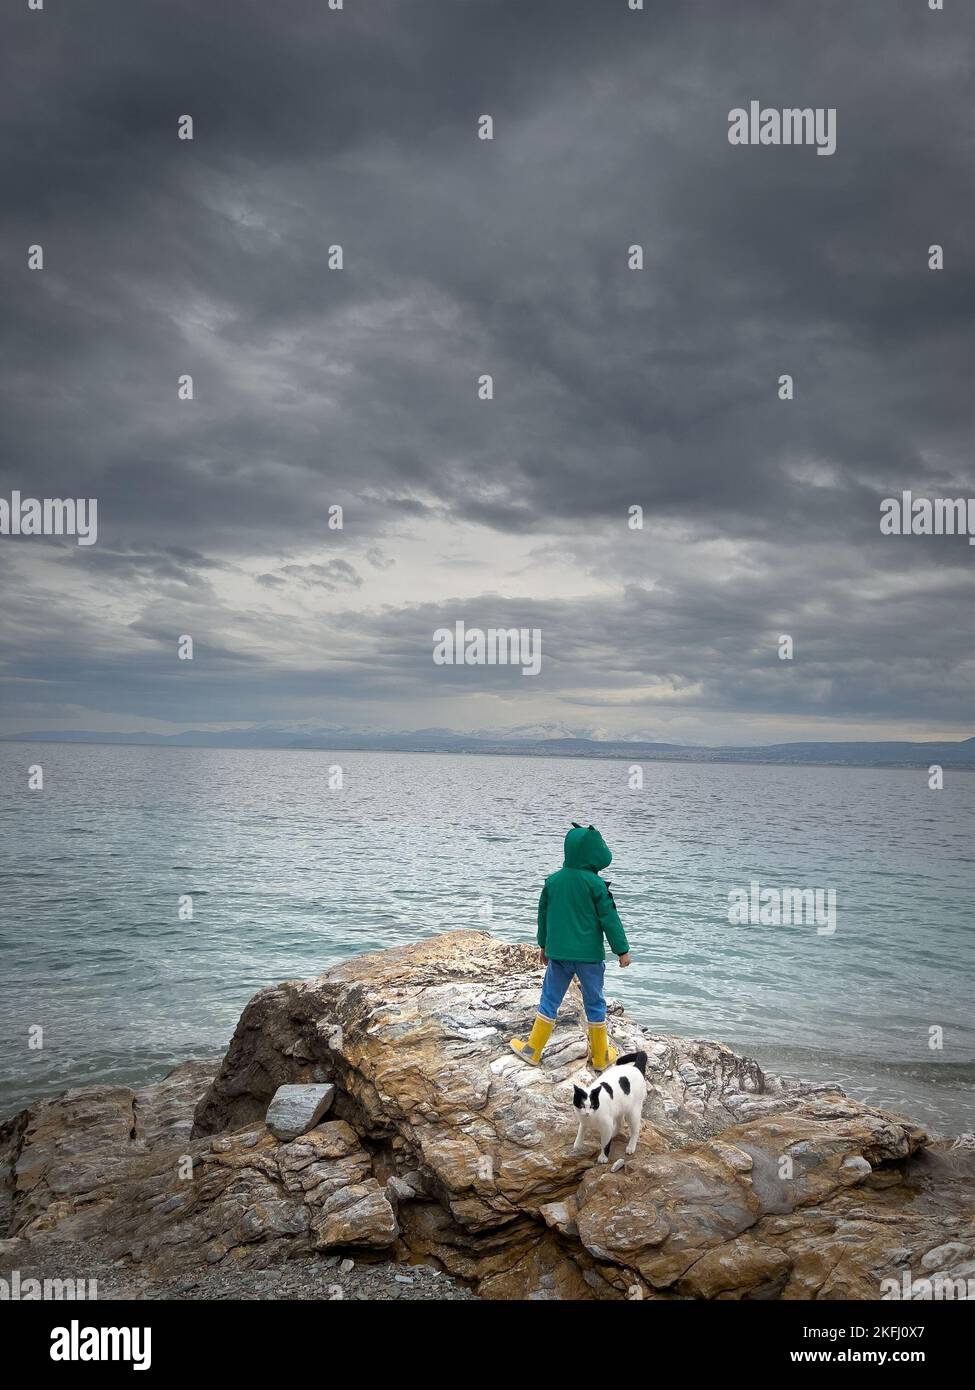 Rear view of boy wearing coat and rubber boots looking at sea while standing with cat on rock against storm clouds Stock Photo